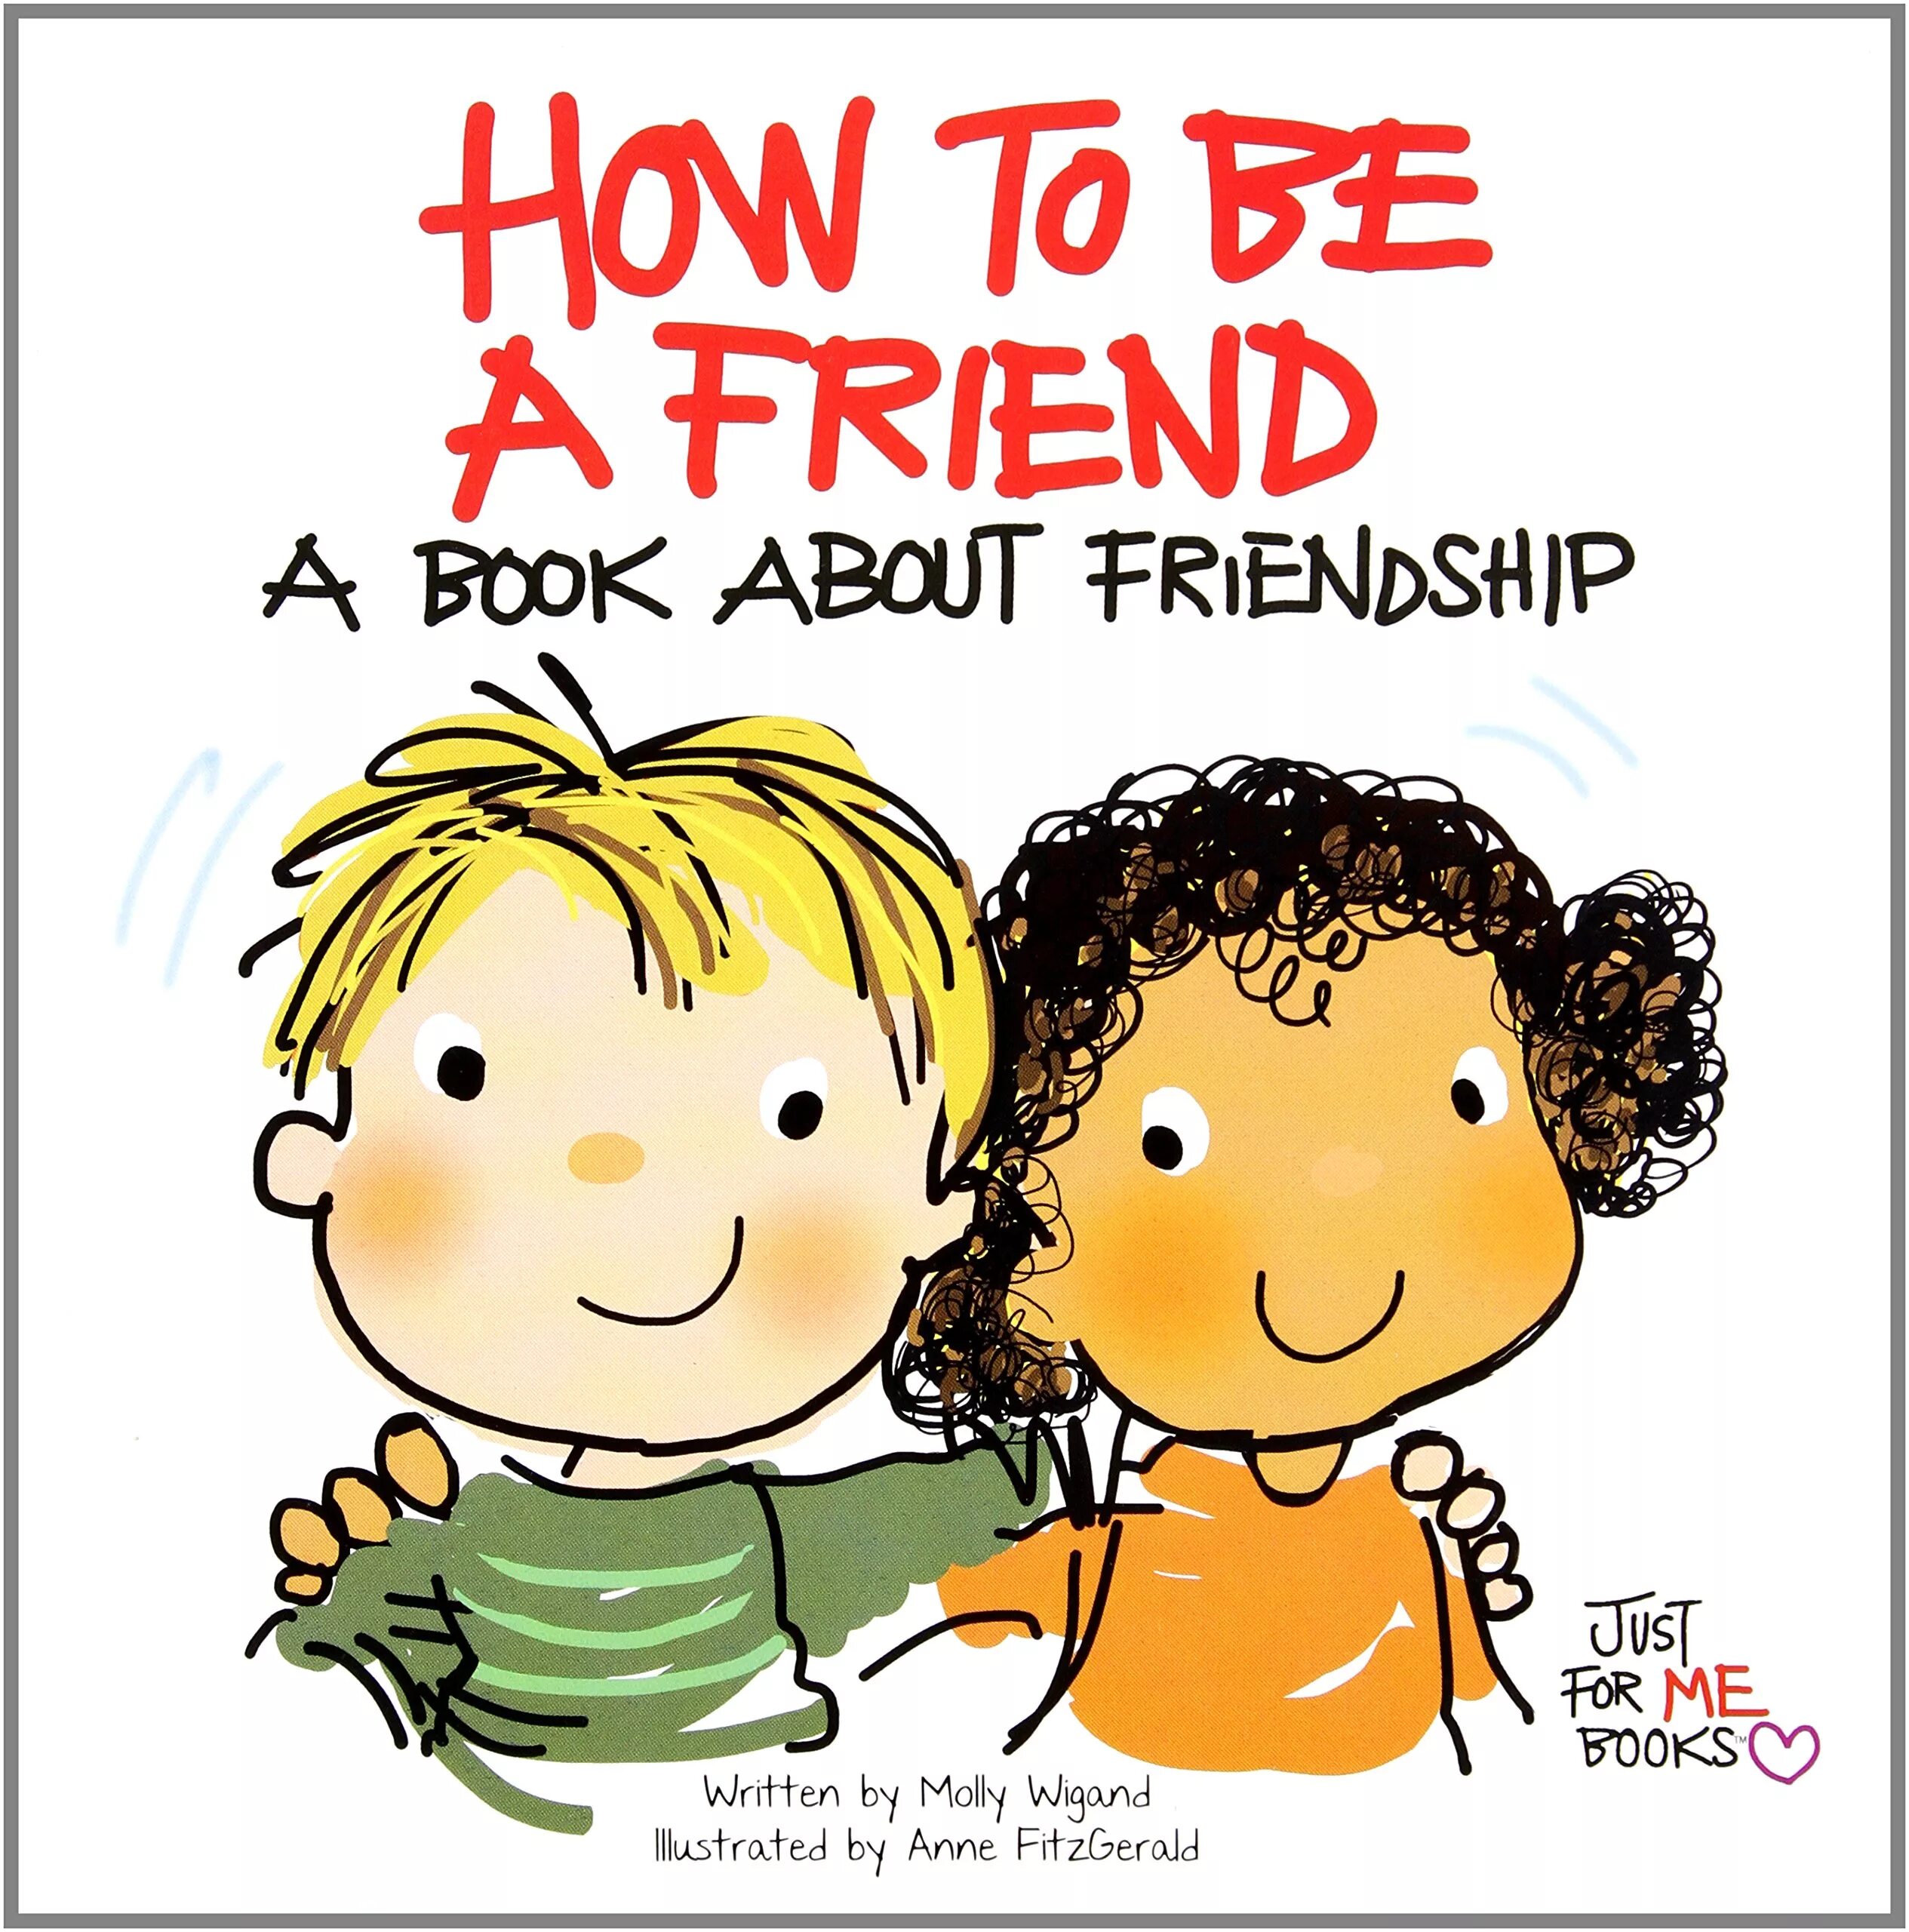 Be a friend. The friends. Книга друг. Книги о дружбе. From reading and your friend